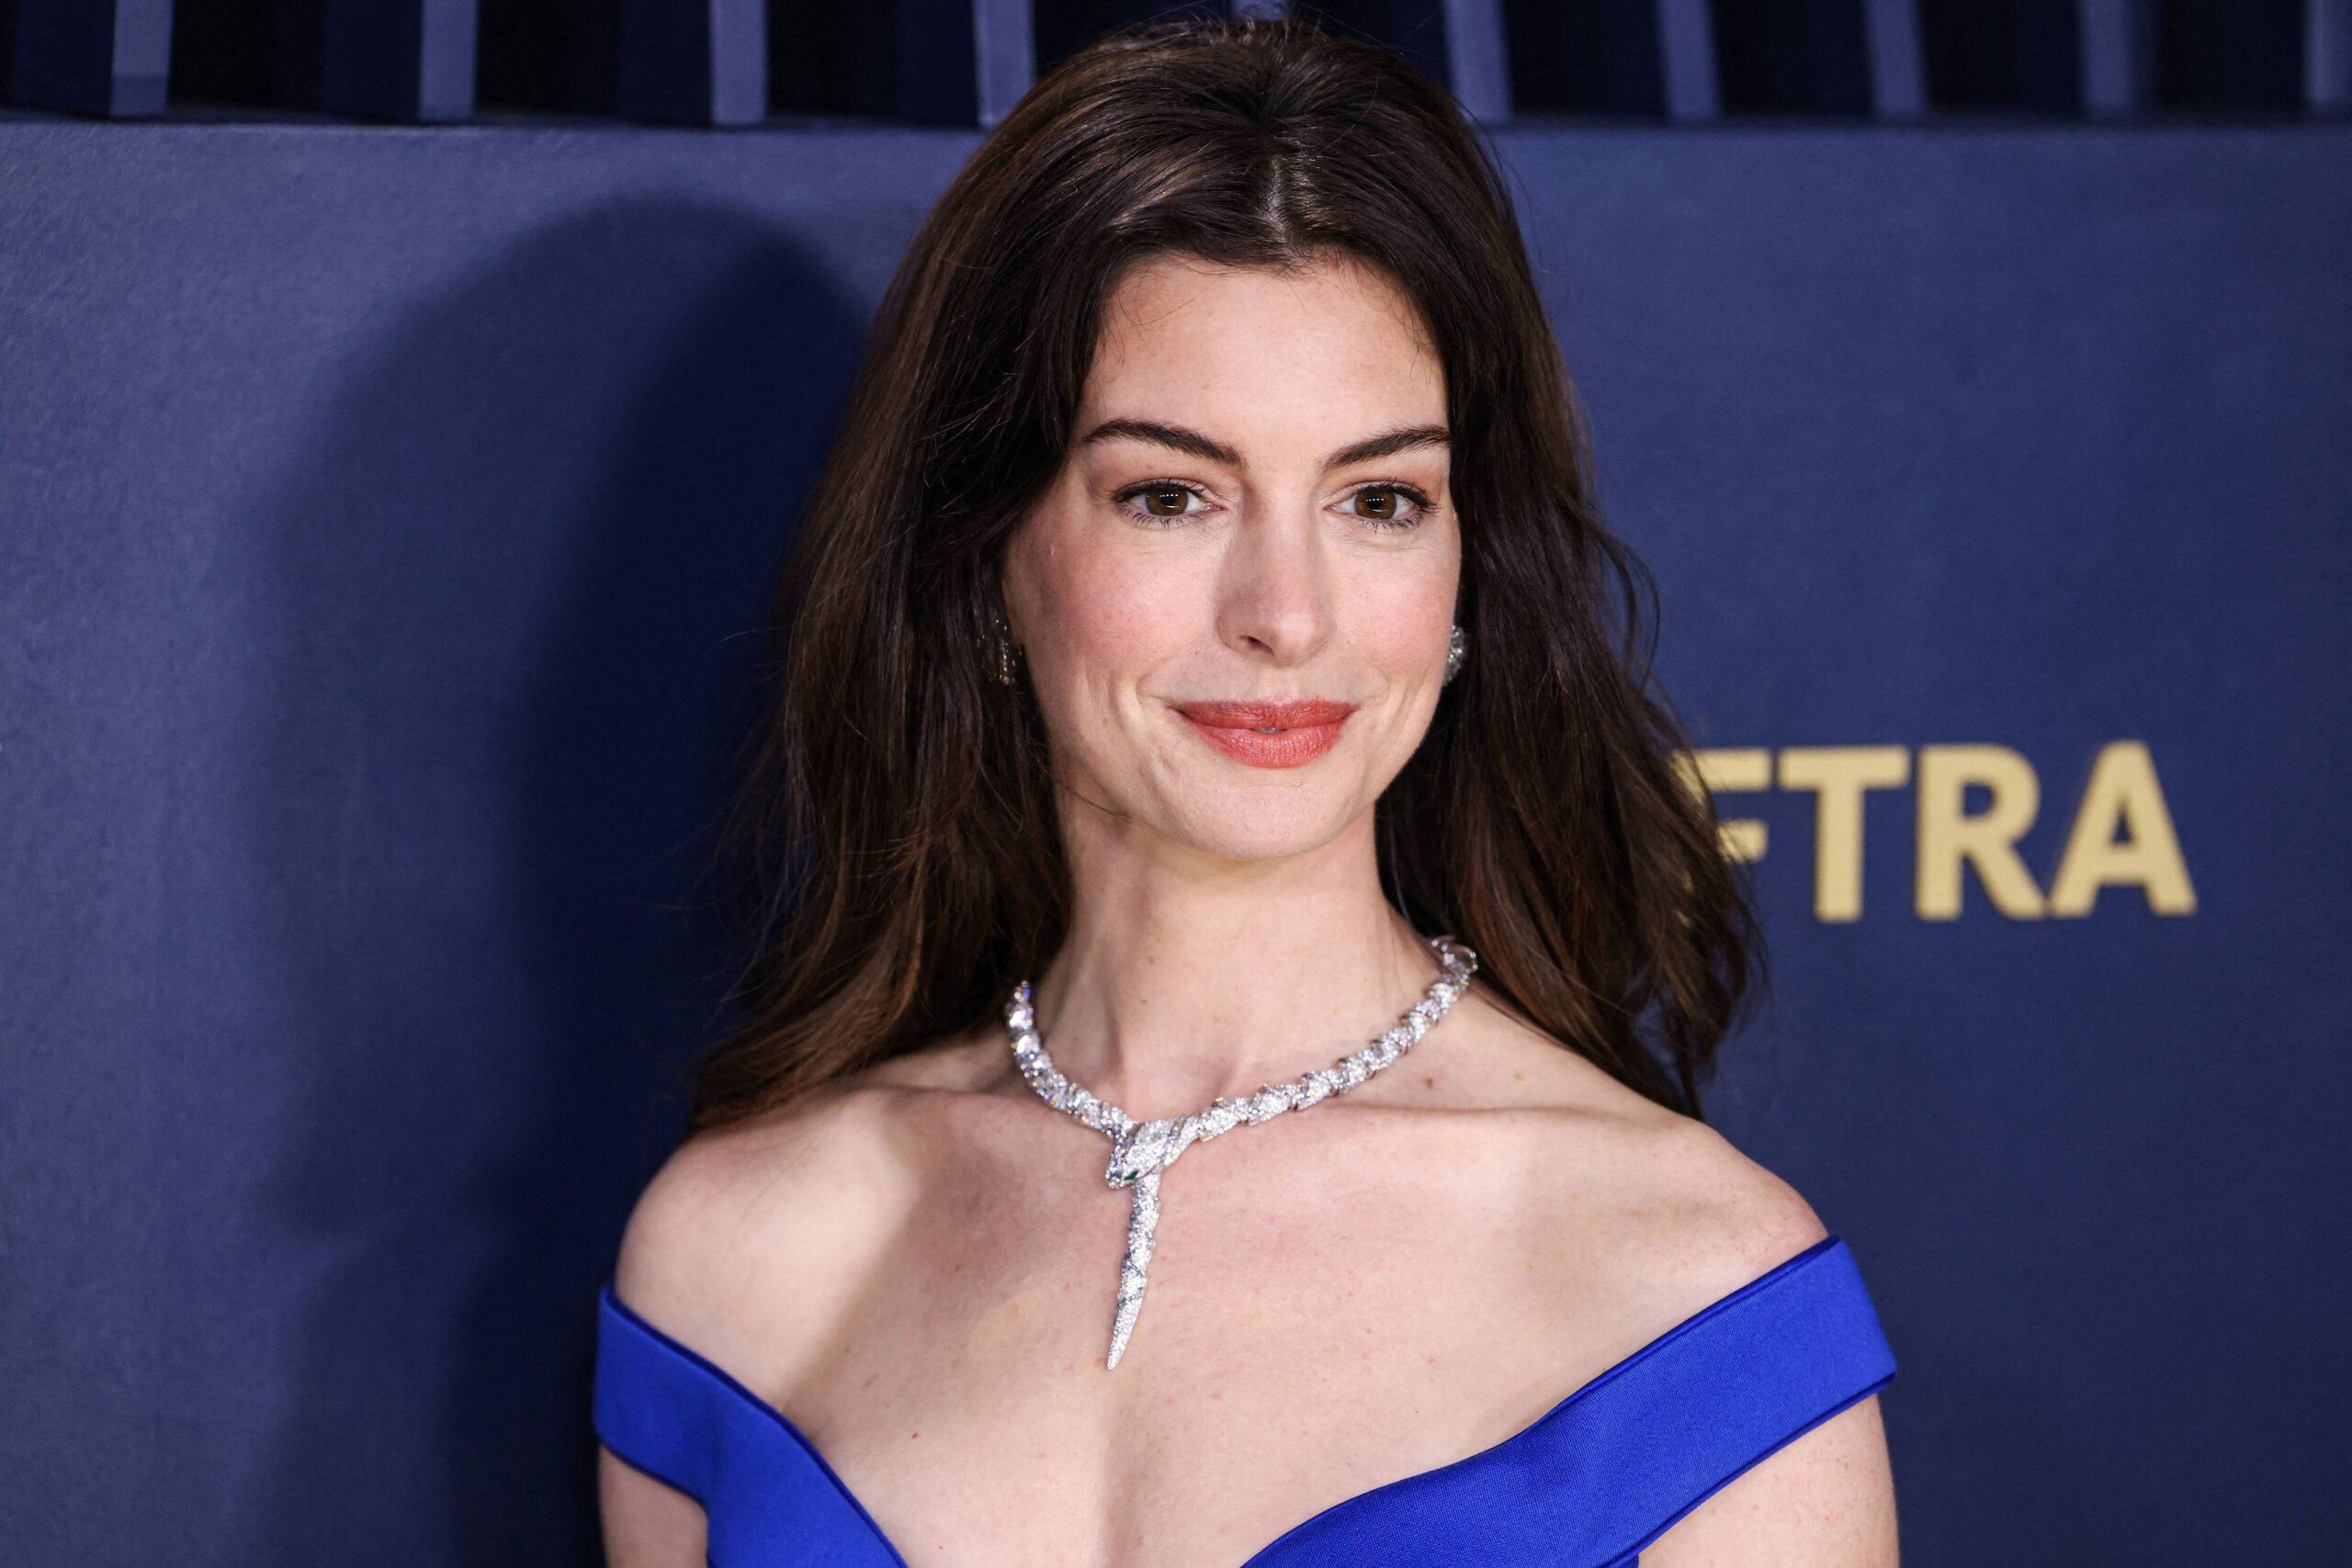 Anne Hathaway Reveals Huge Milestone: 'I'm Over 5 Years Sober'